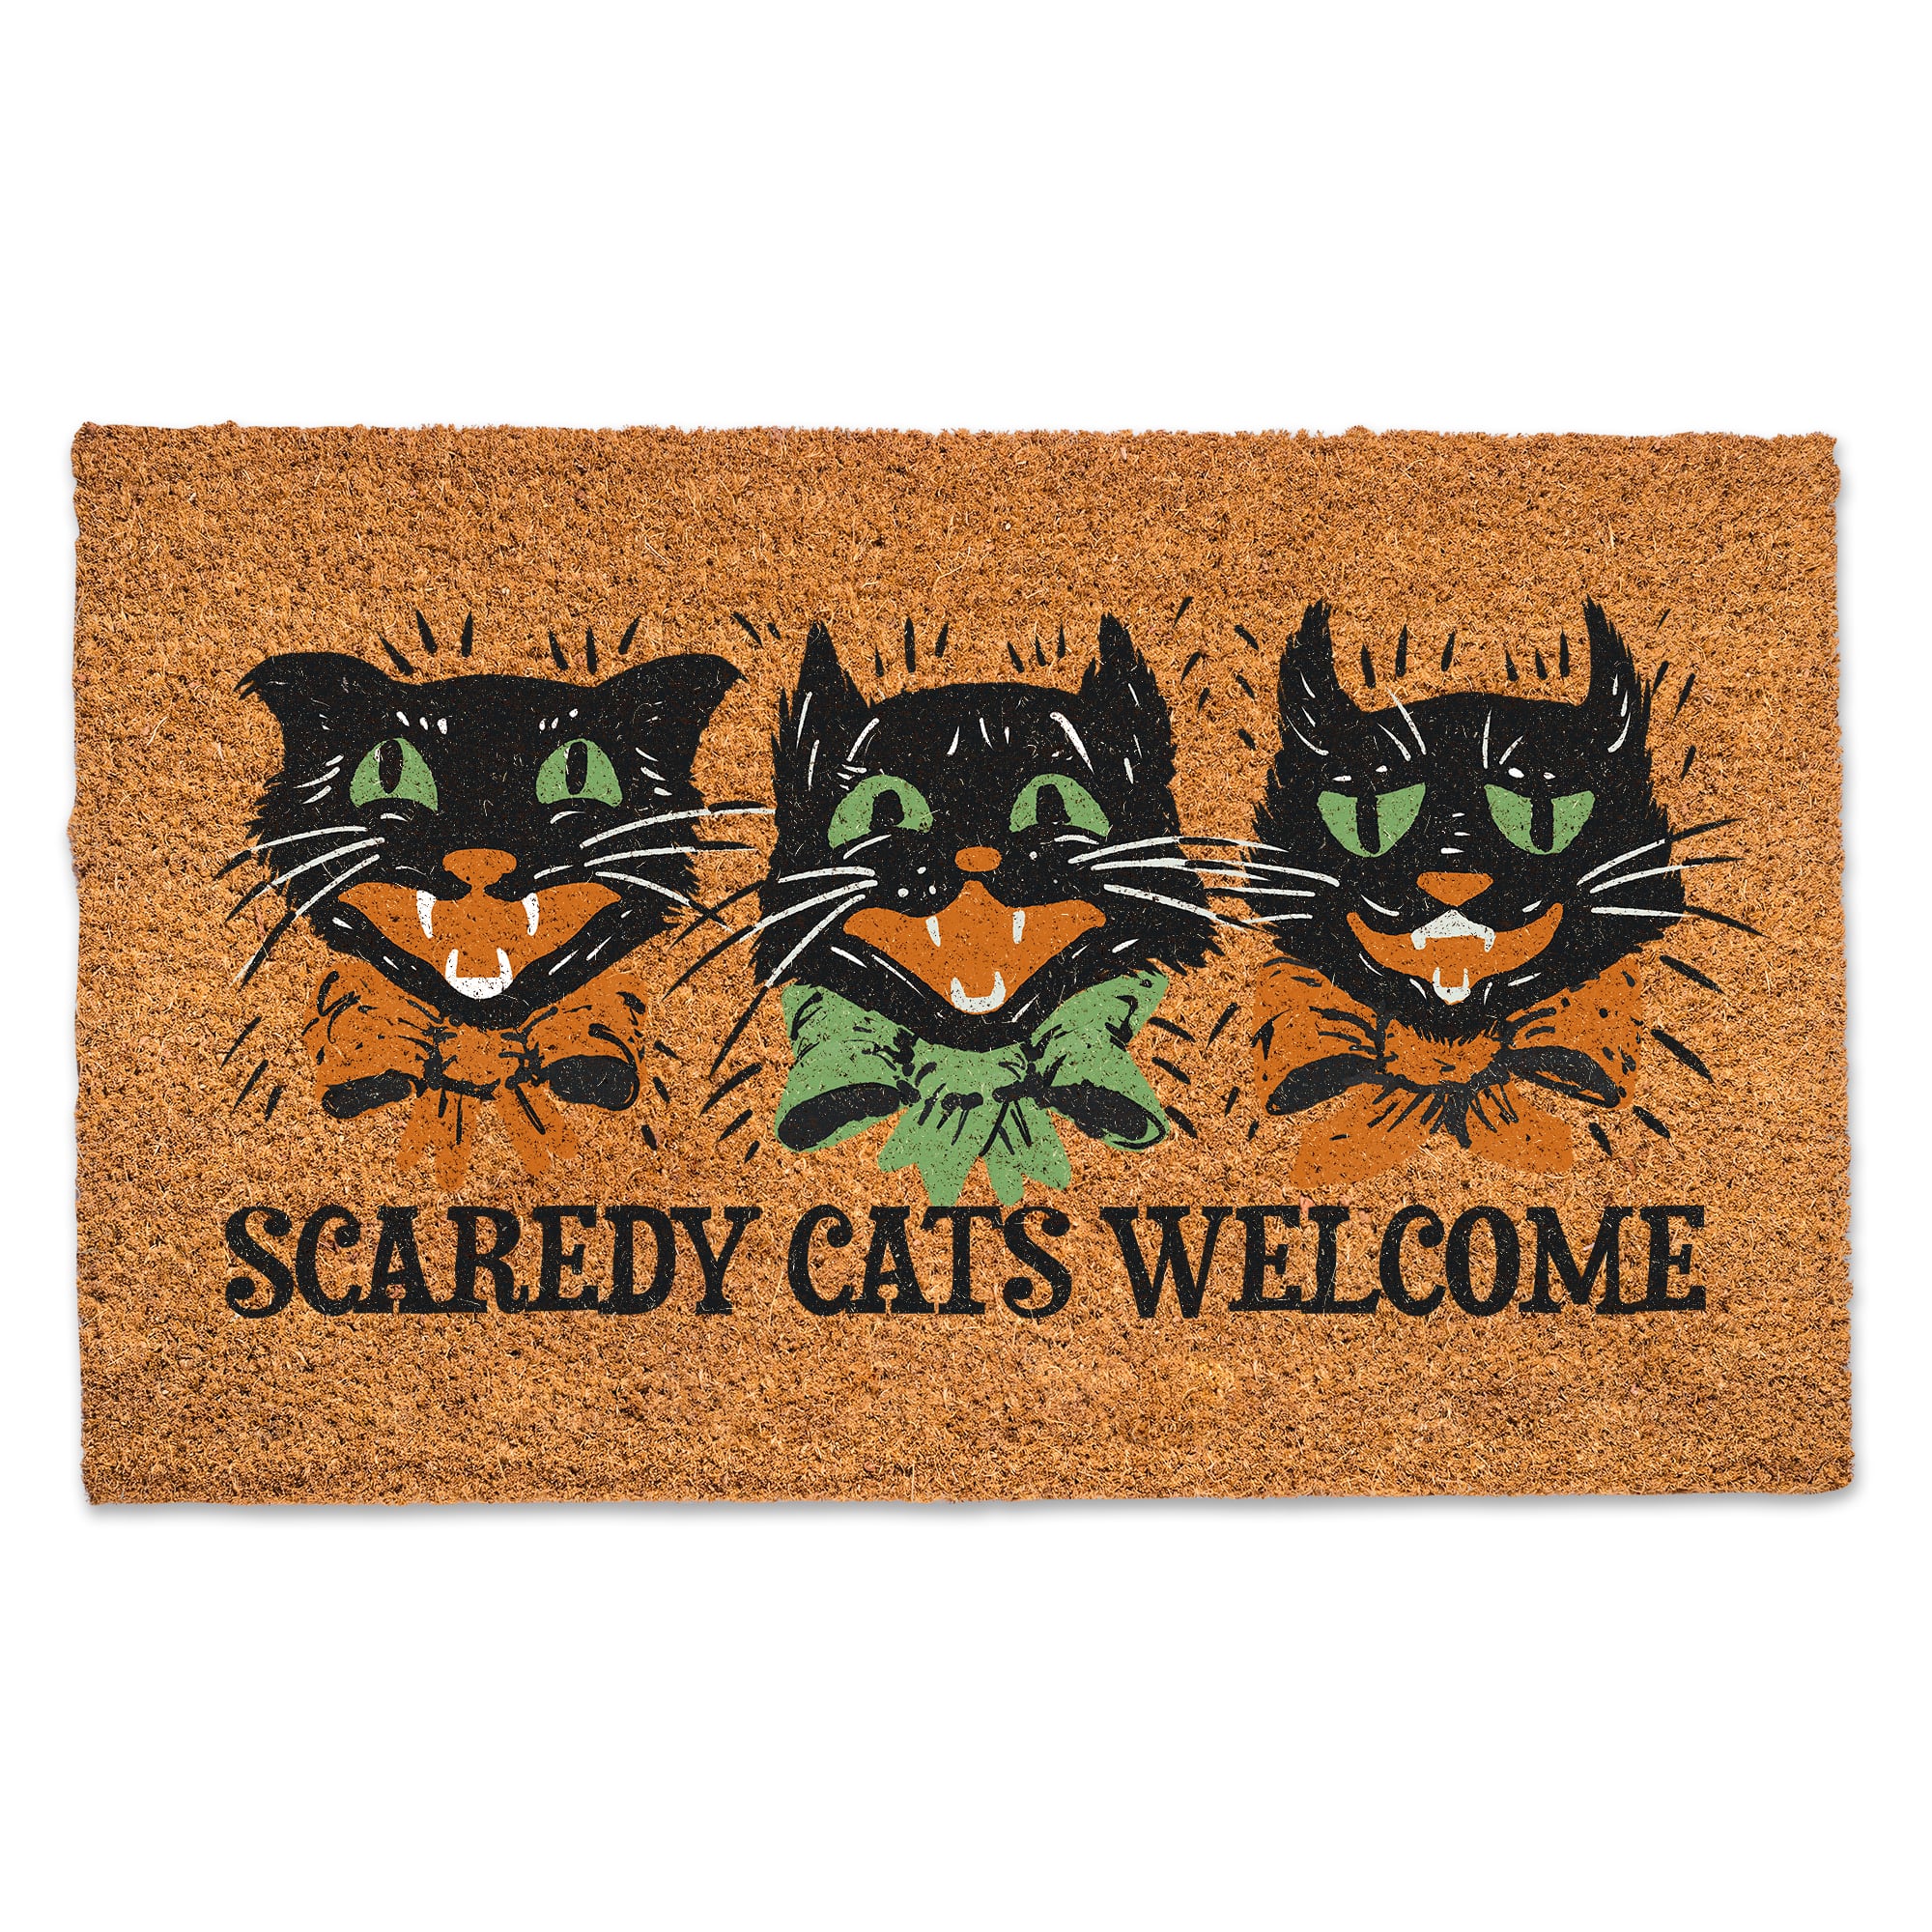 Scaredy cats | Poster